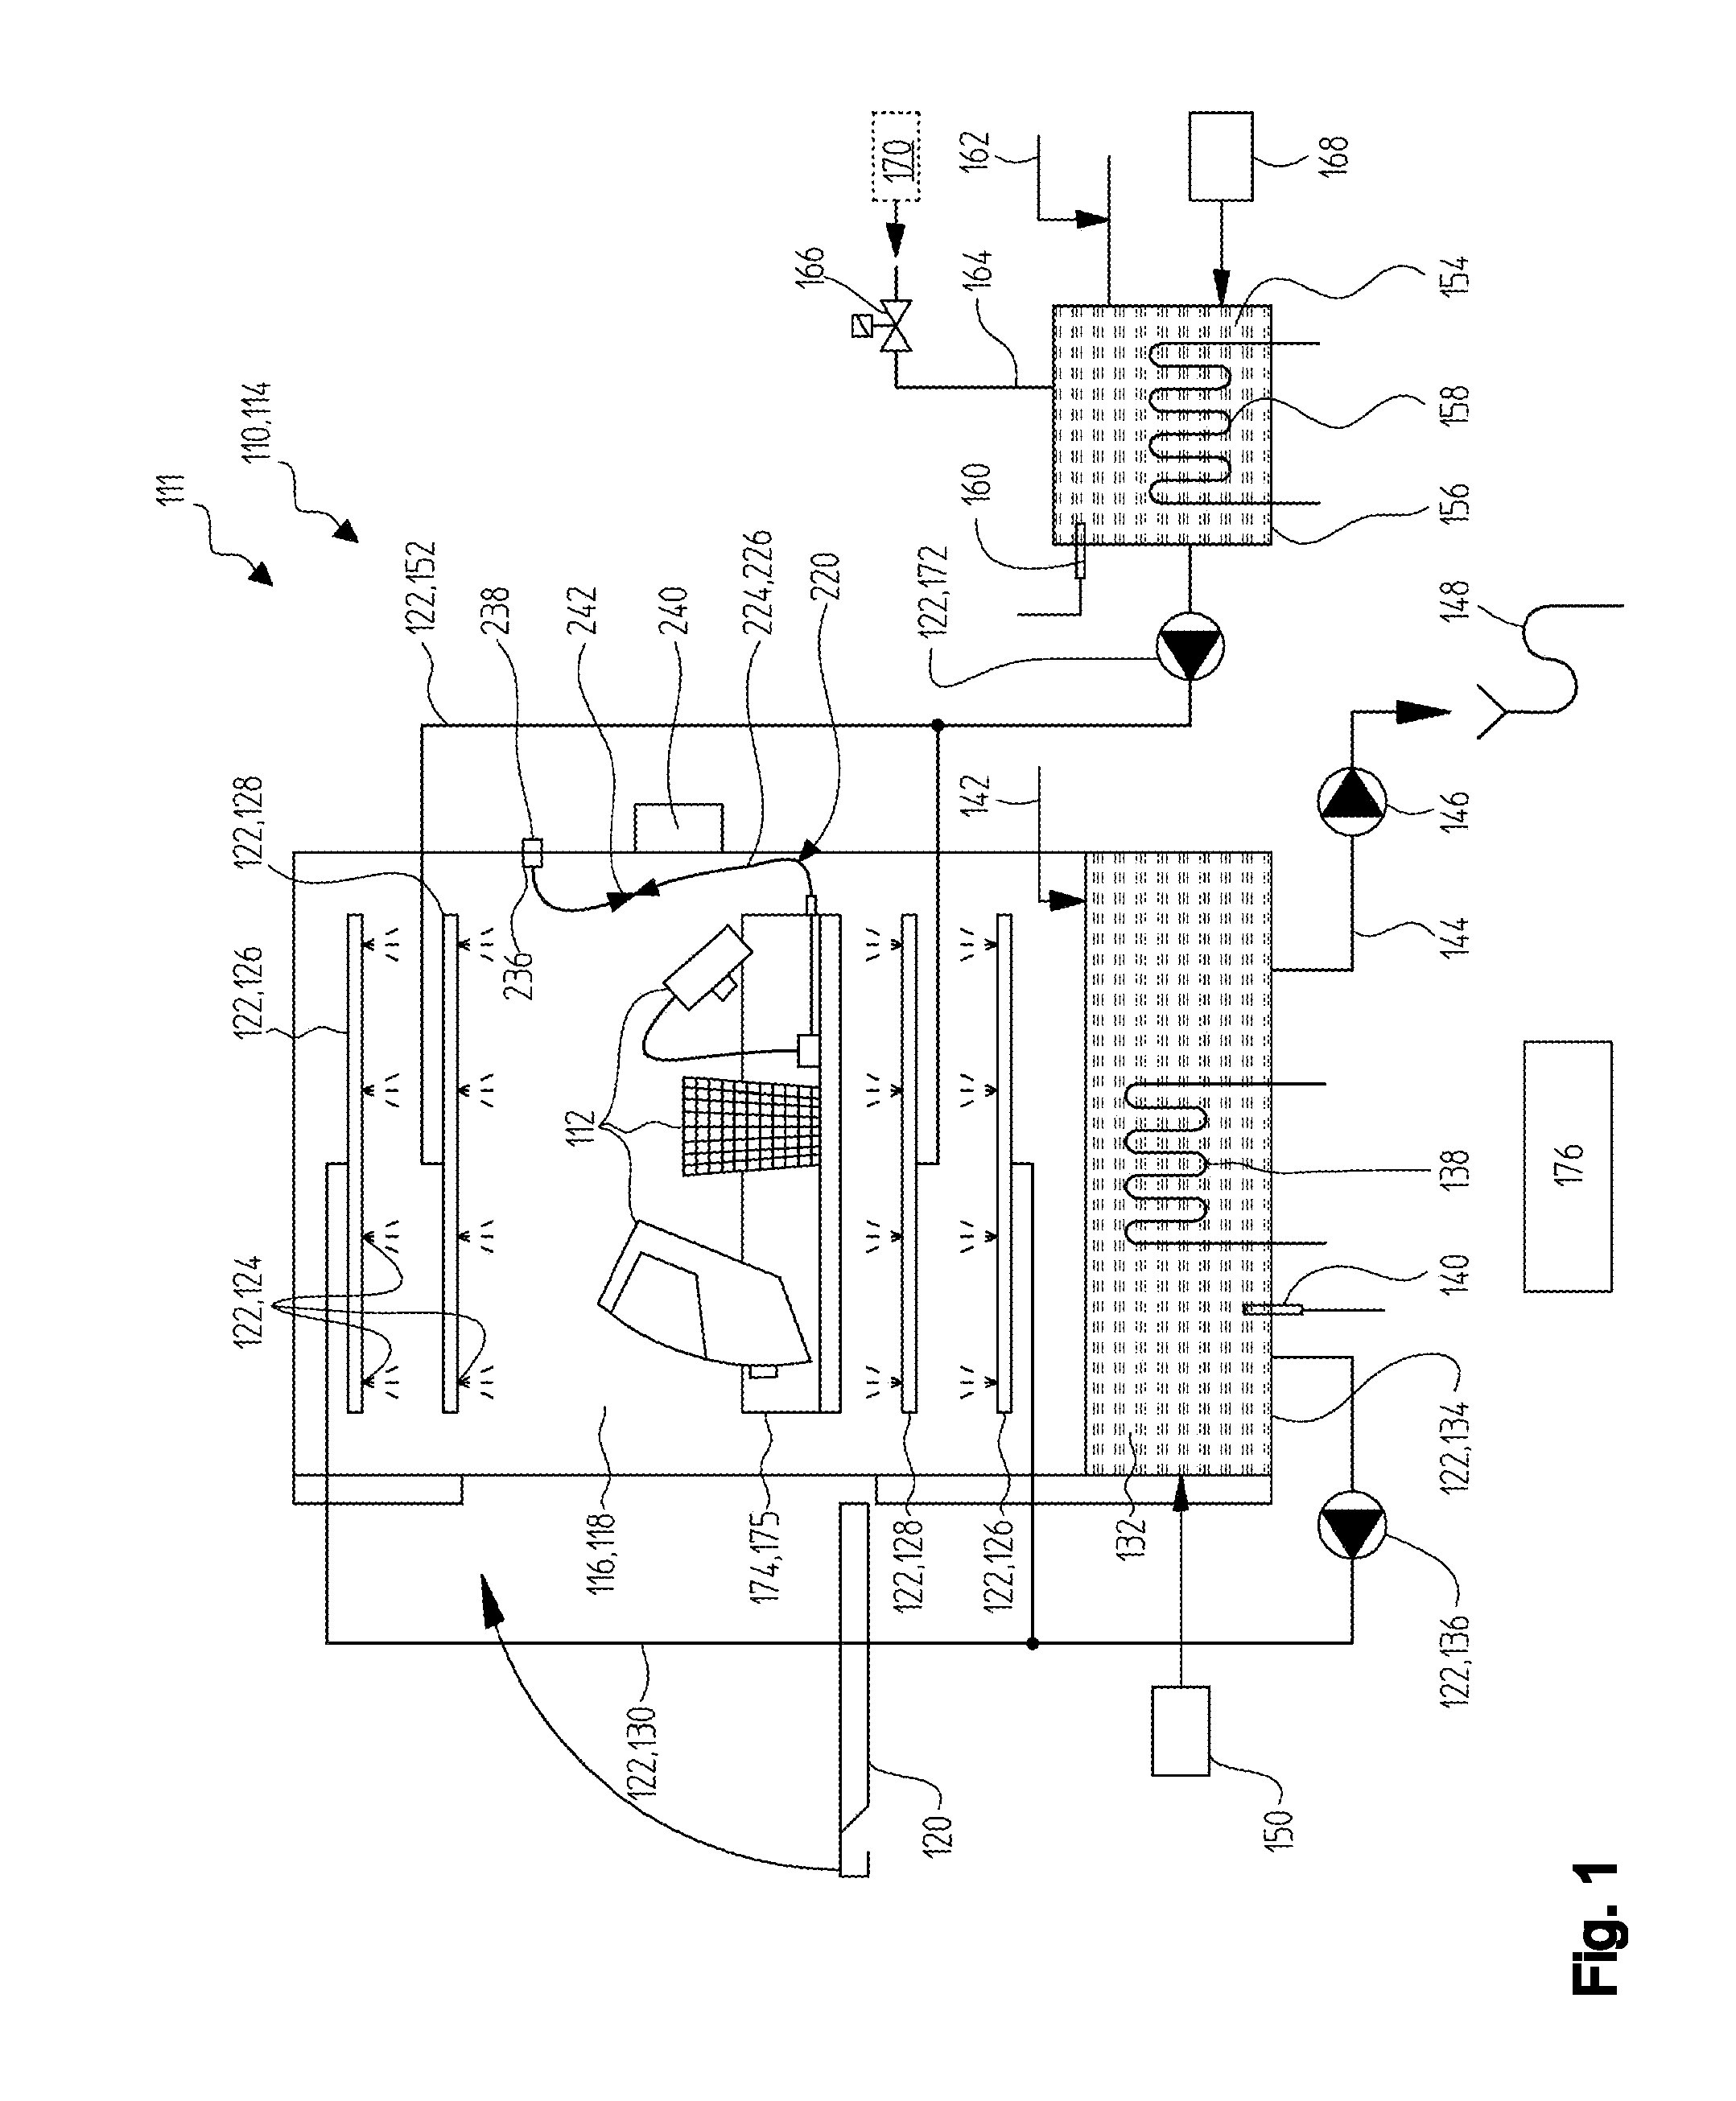 Holder product range and cleaning apparatus for cleaning breathing apparatuses